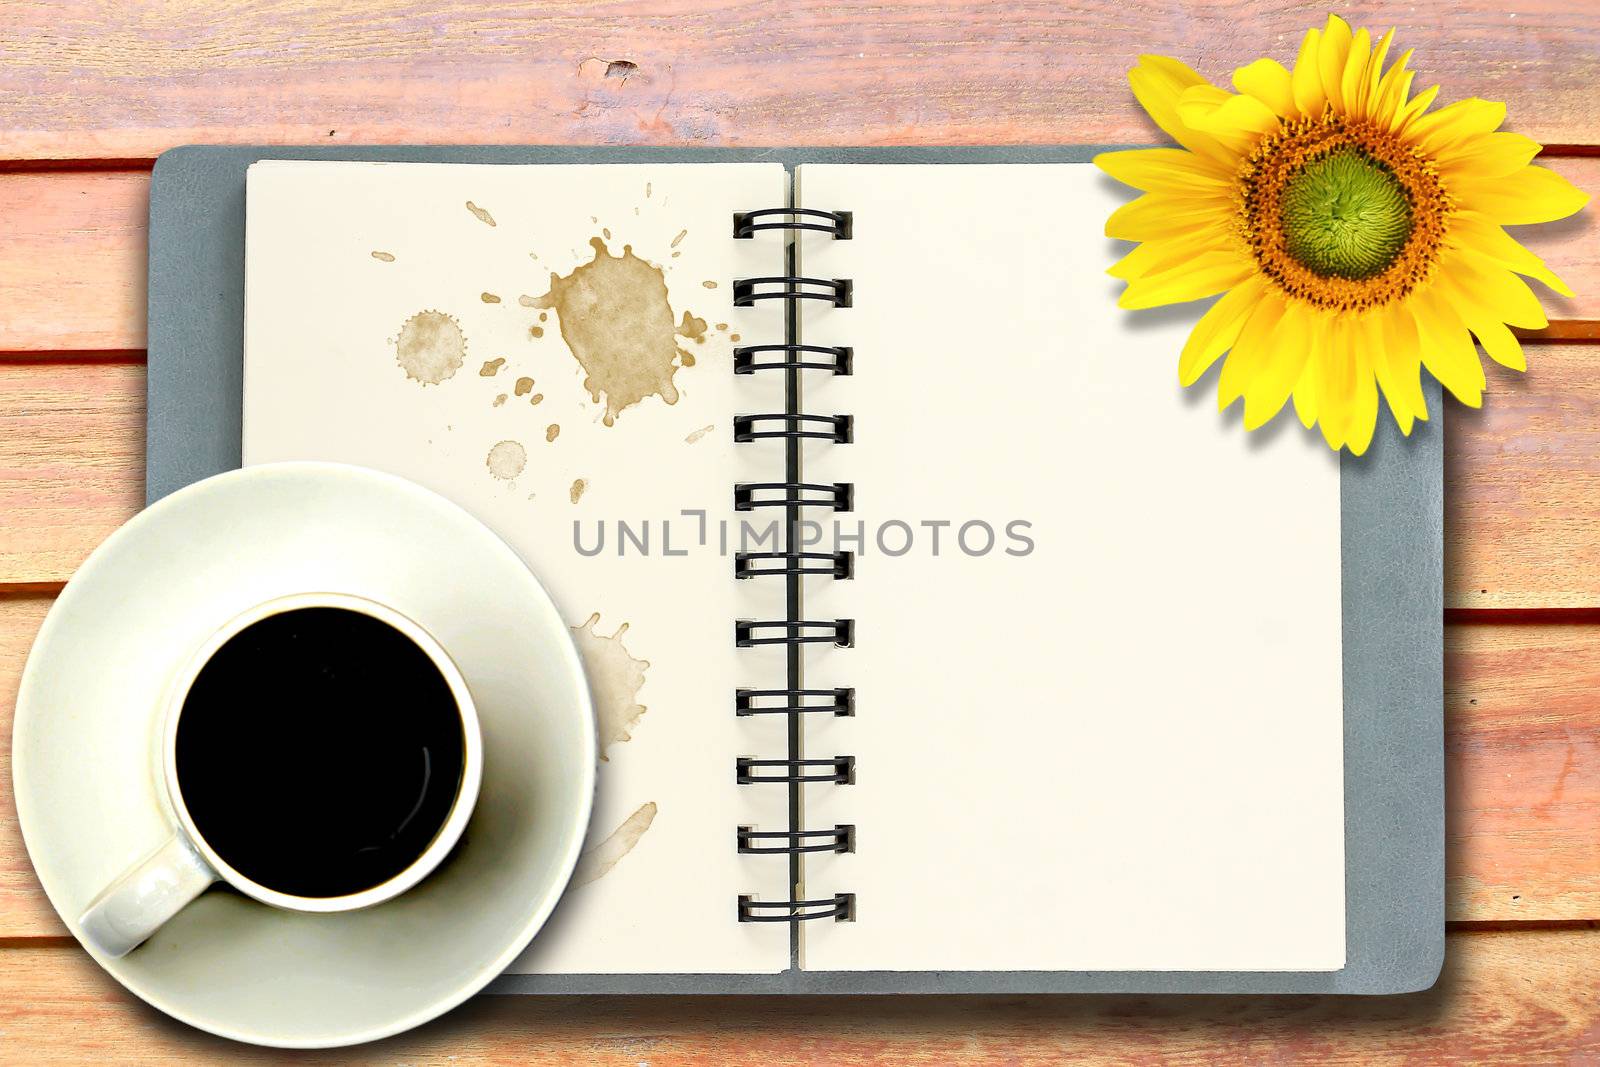 White cup of hot coffee and white sketch book on wood table